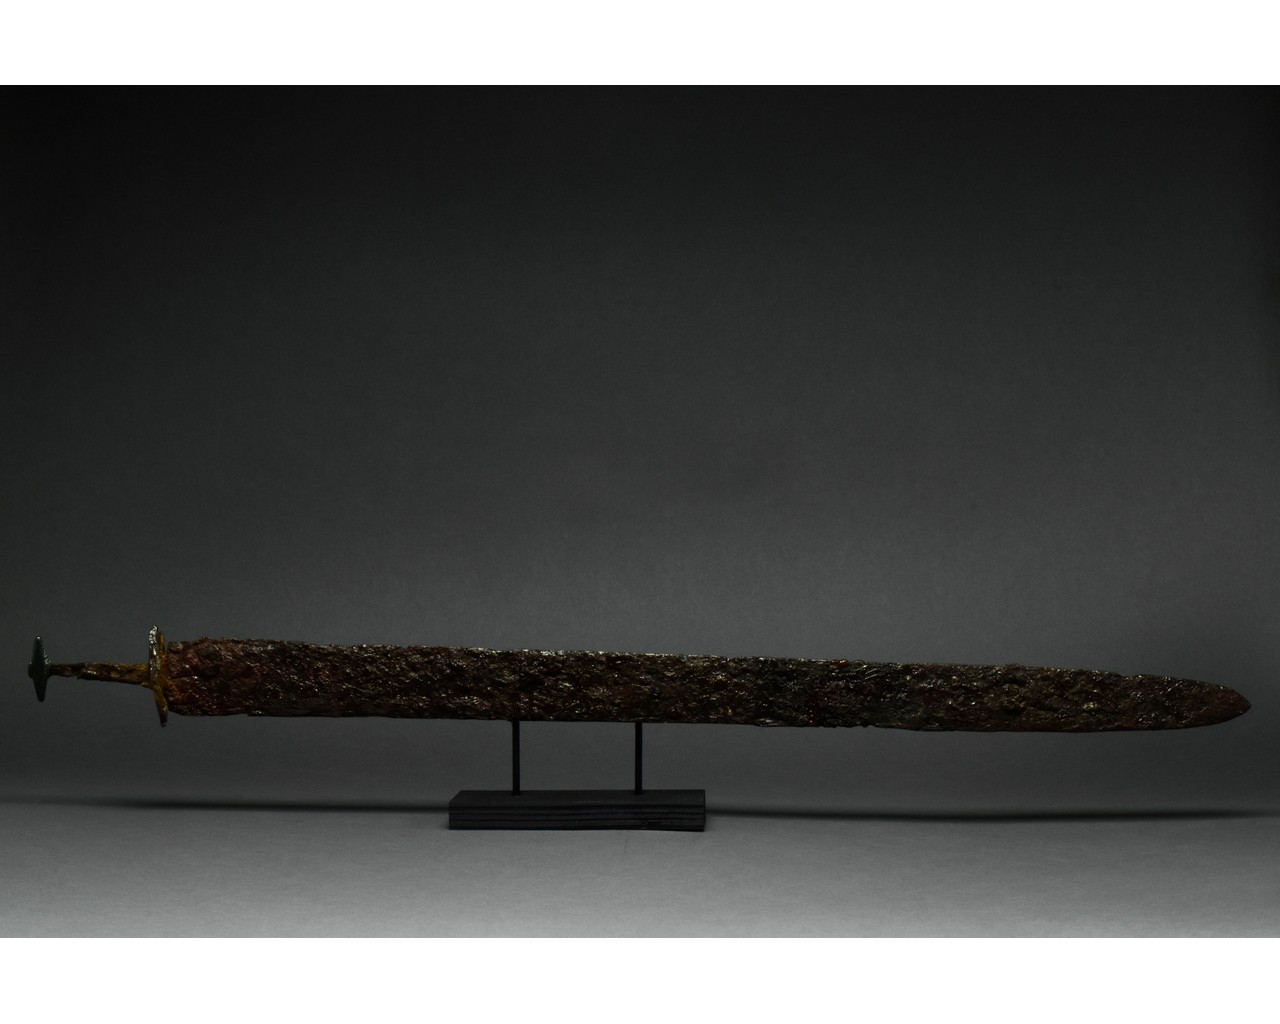 LATE ROMAN IRON SPATHA SWORD WITH BRONZE POMMEL - Image 2 of 7